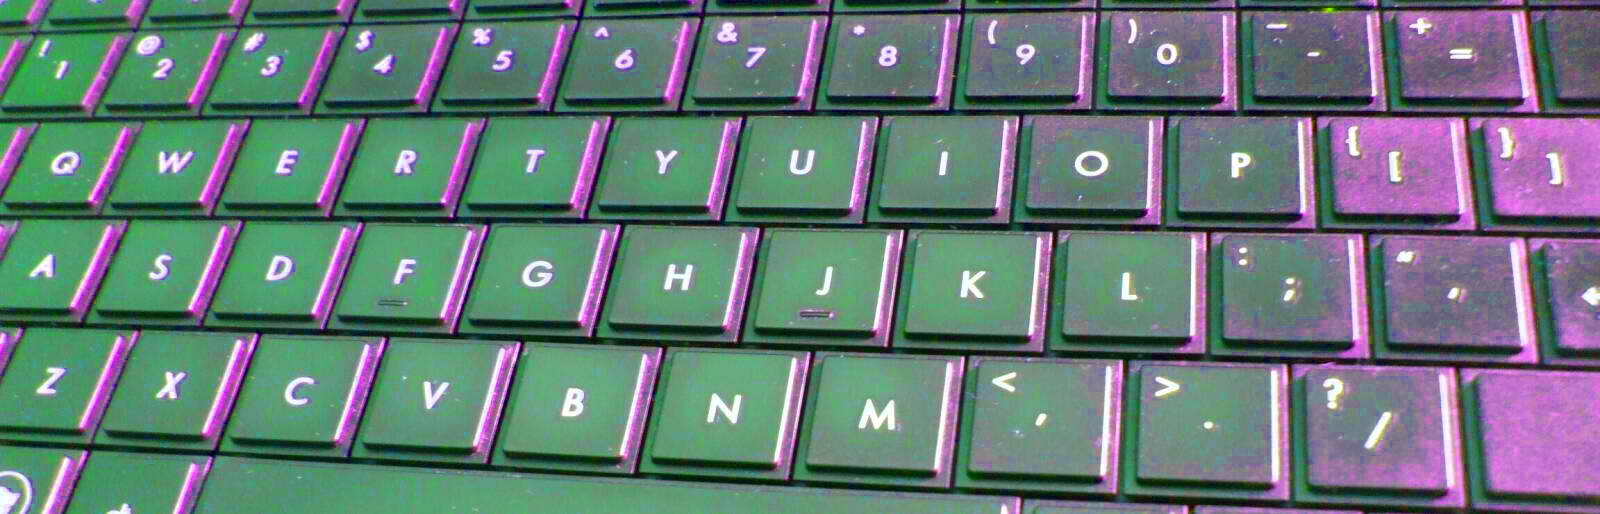 Keyboard with remodulated color map.